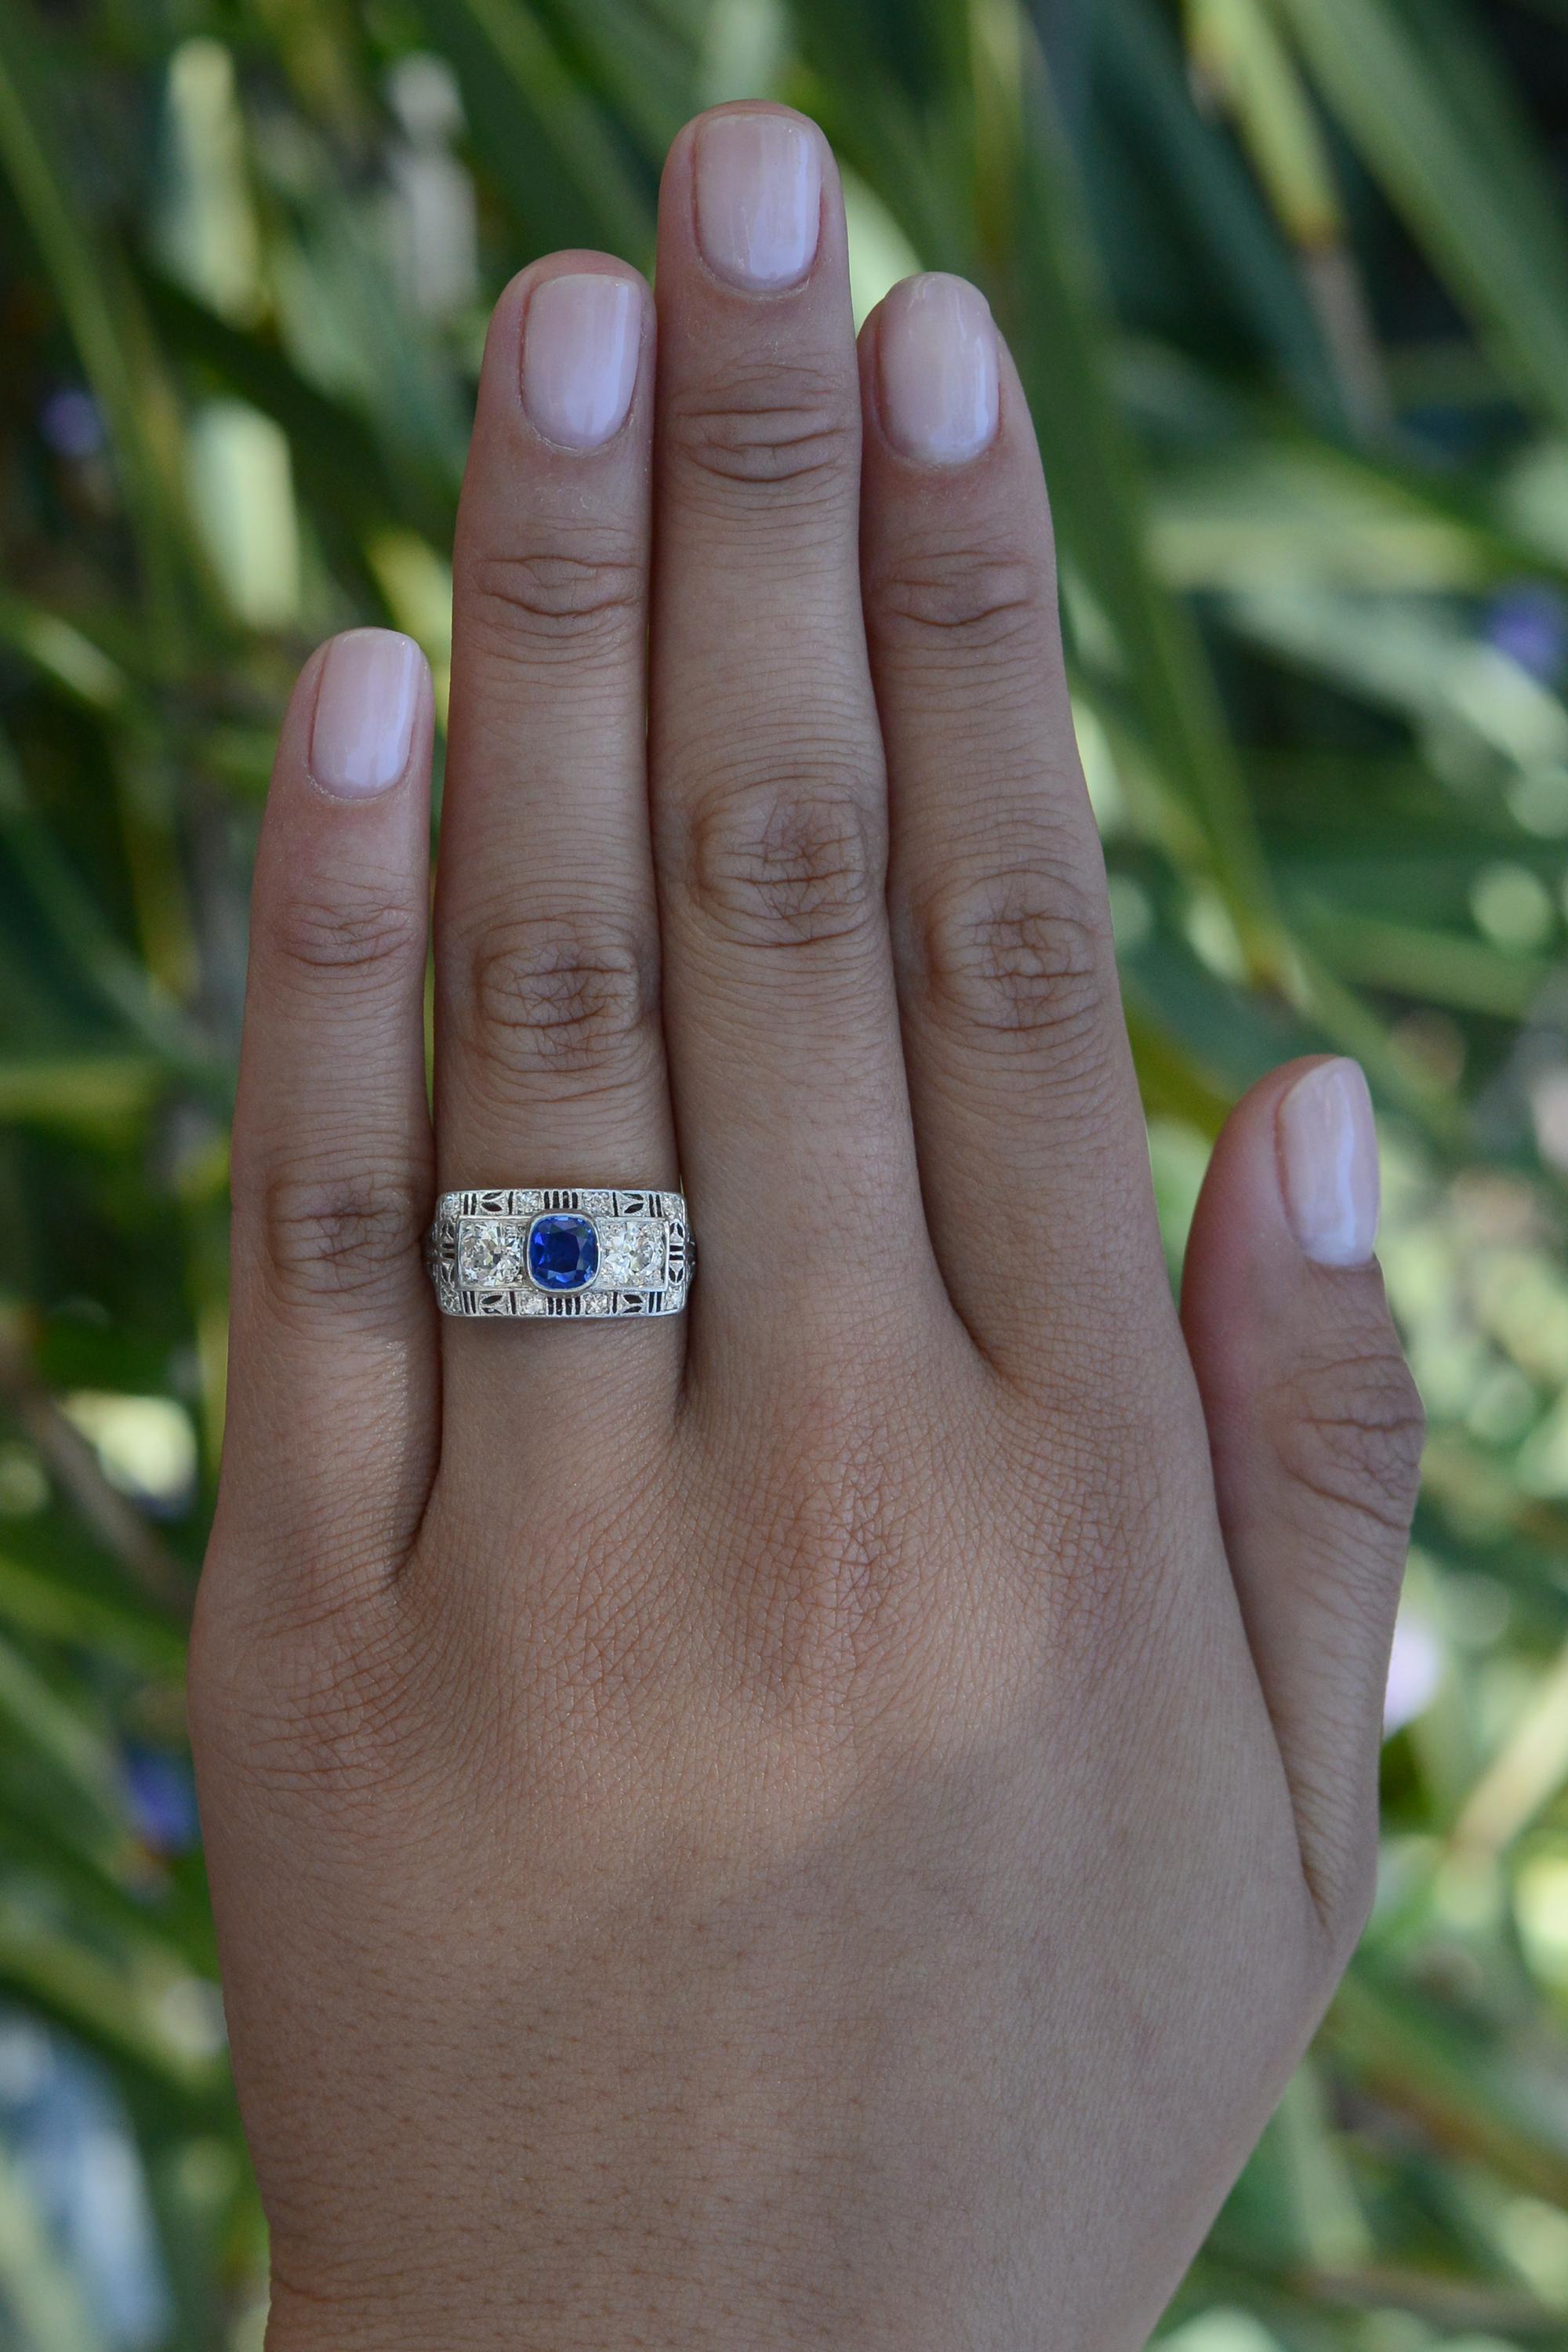 An authentic Art Deco engagement ring, featuring a prominent French design crafted in the great jazz era of the 1920s. The center deep ocean blue sapphire is flanked by 2 old European circular diamonds presenting excellent clarity and life. Boasting